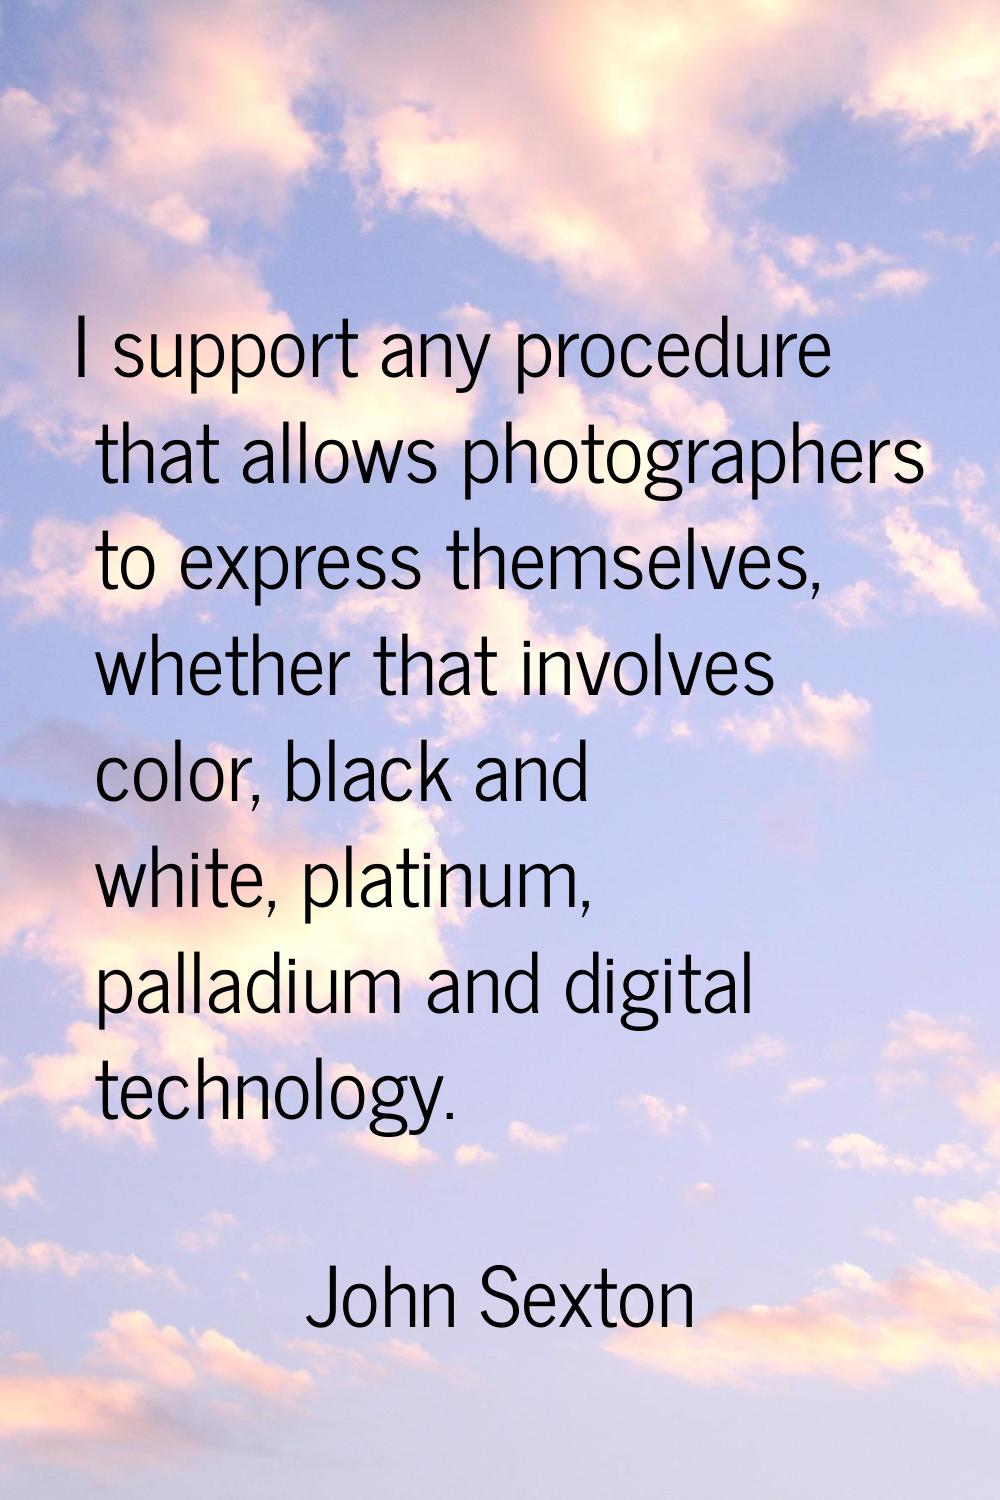 I support any procedure that allows photographers to express themselves, whether that involves colo